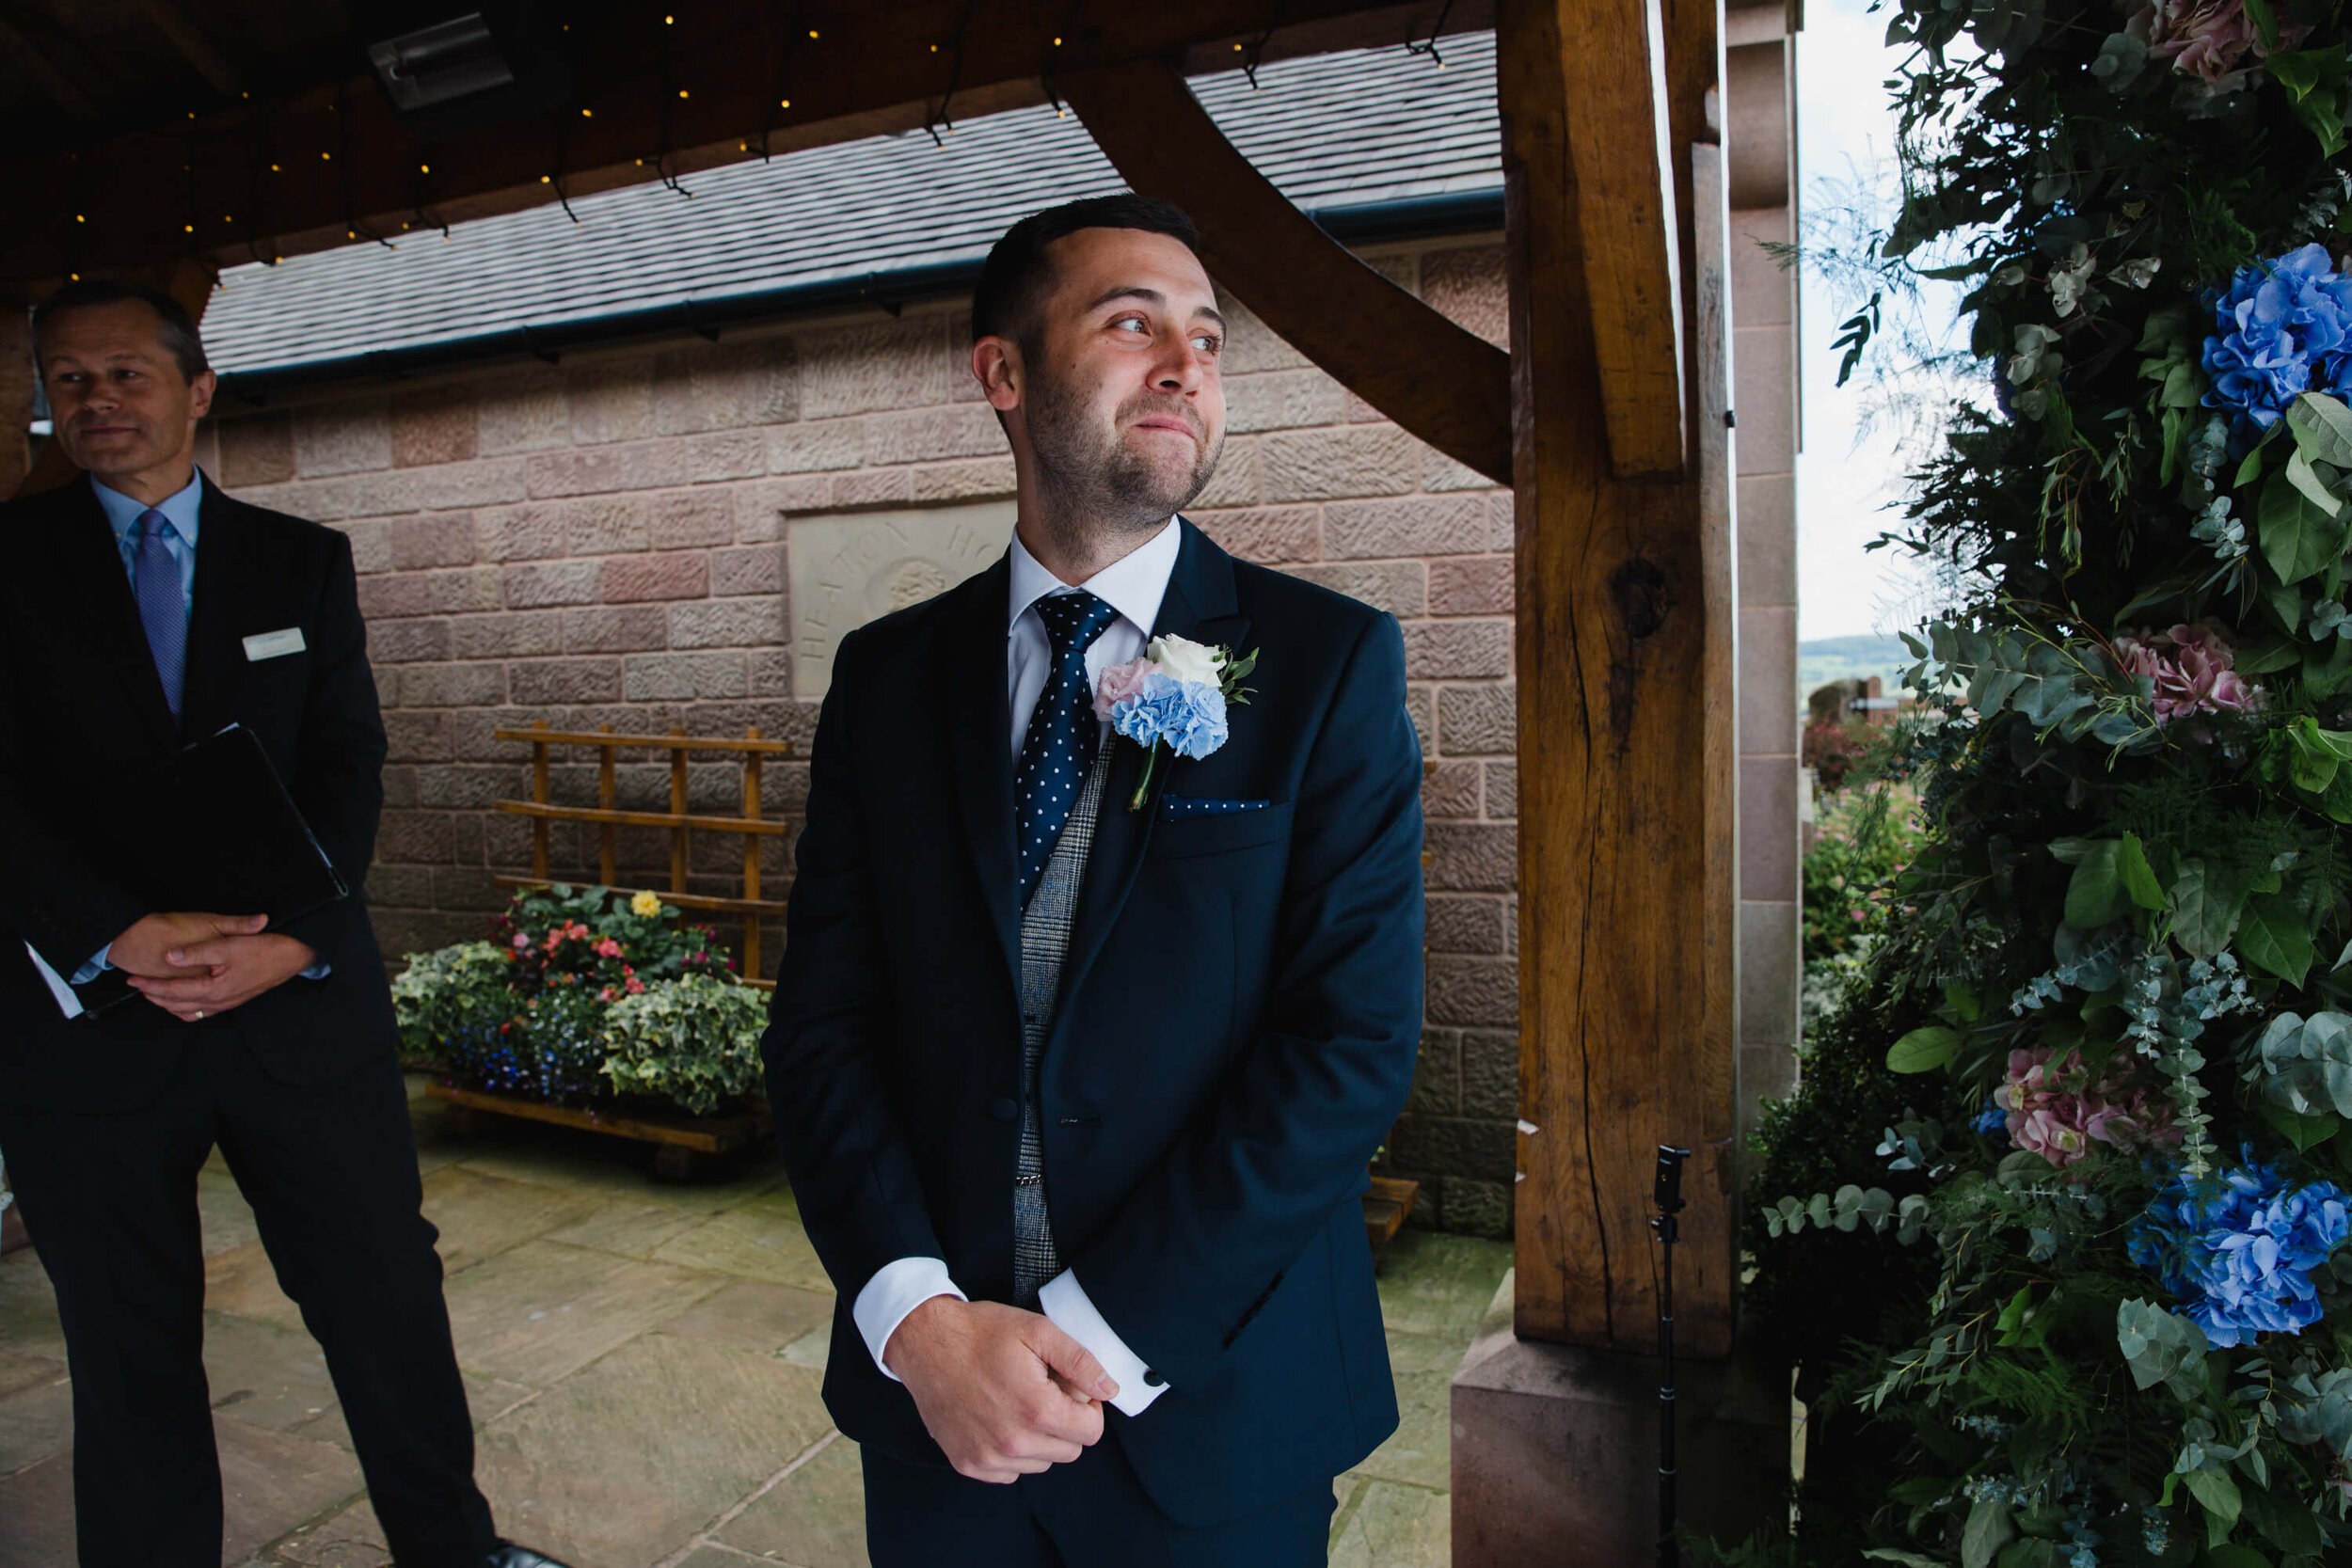 groom at top of aisle awaiting bride during ceremony processional